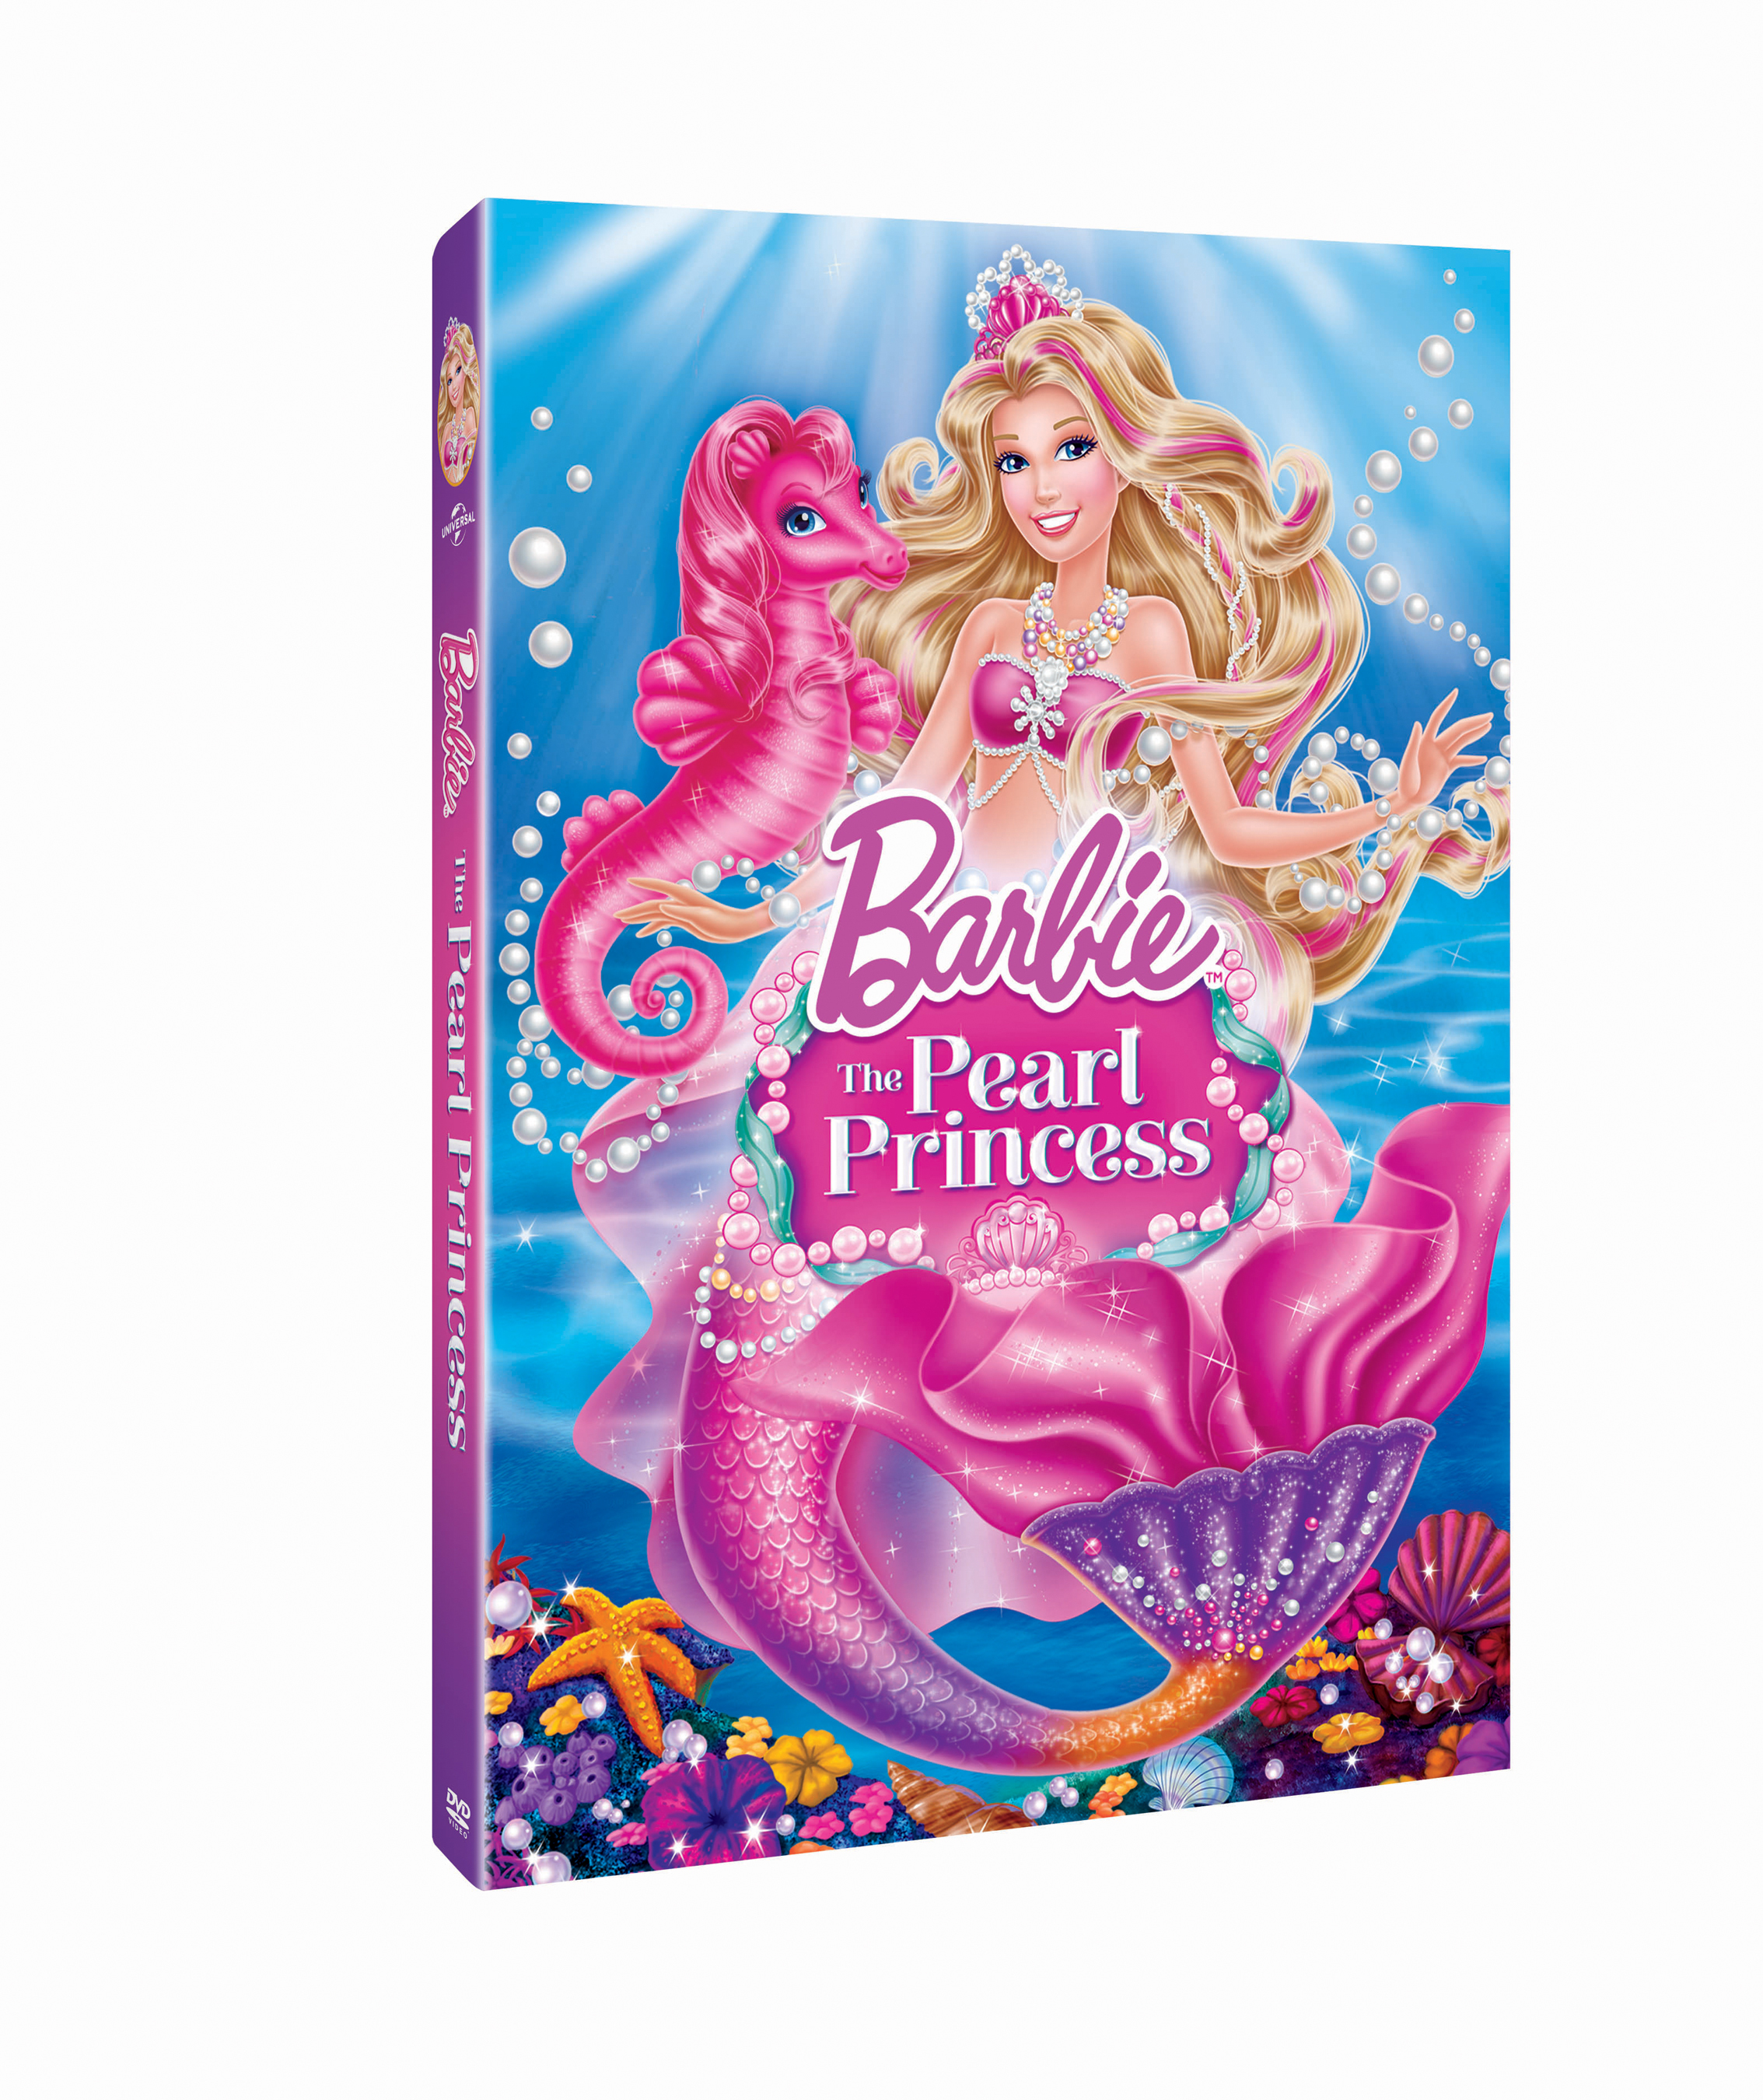 barbie and the pearl princess